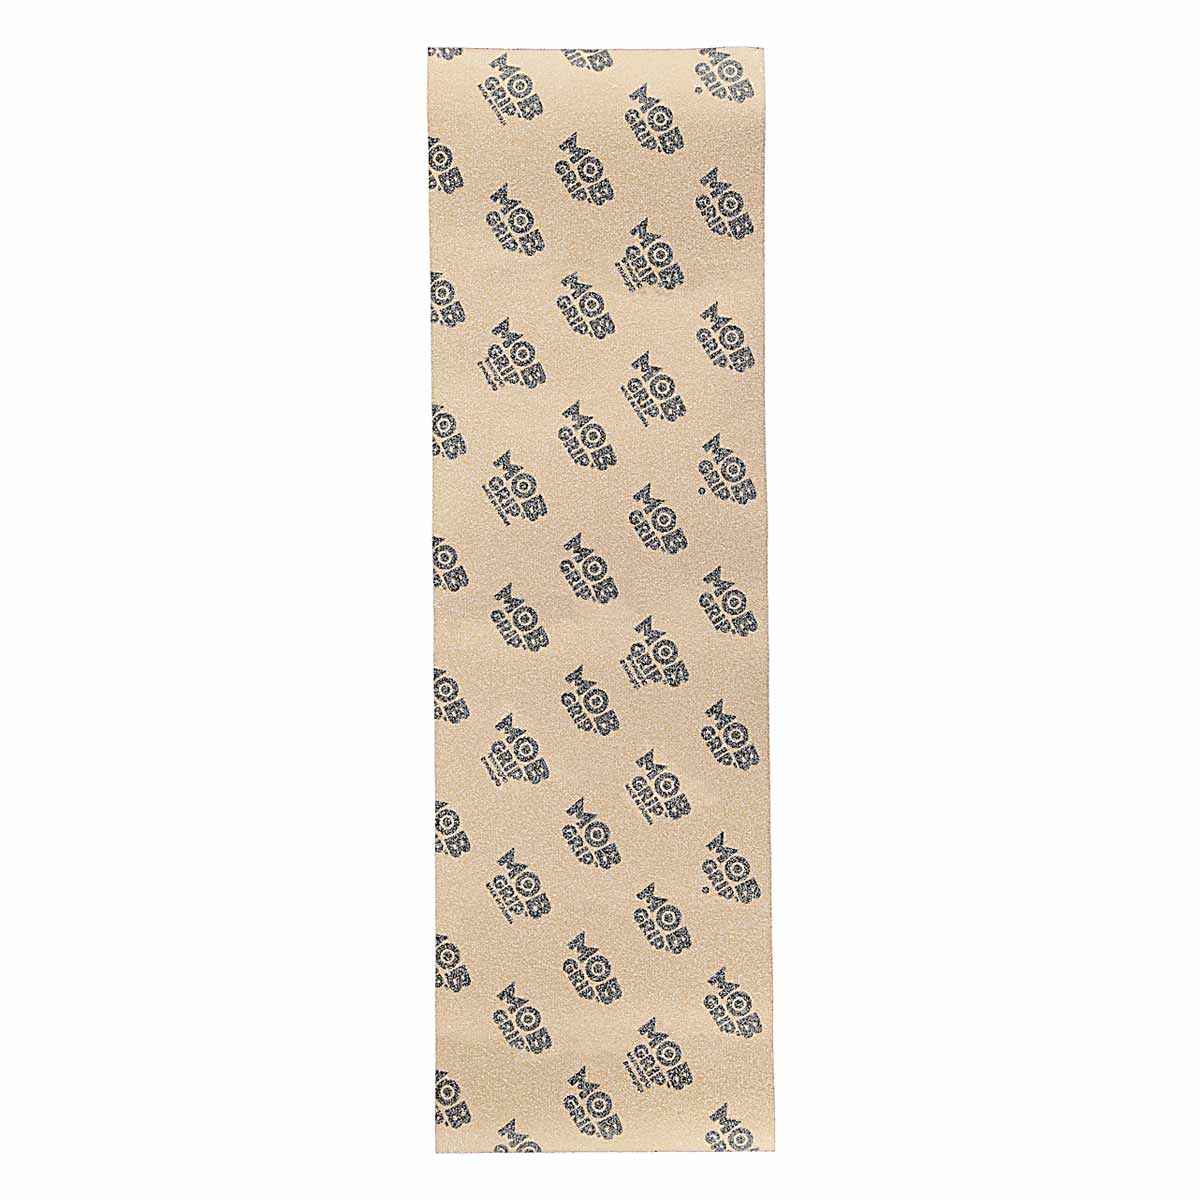 MOB Scales Skateboard Grip Tape Clear 